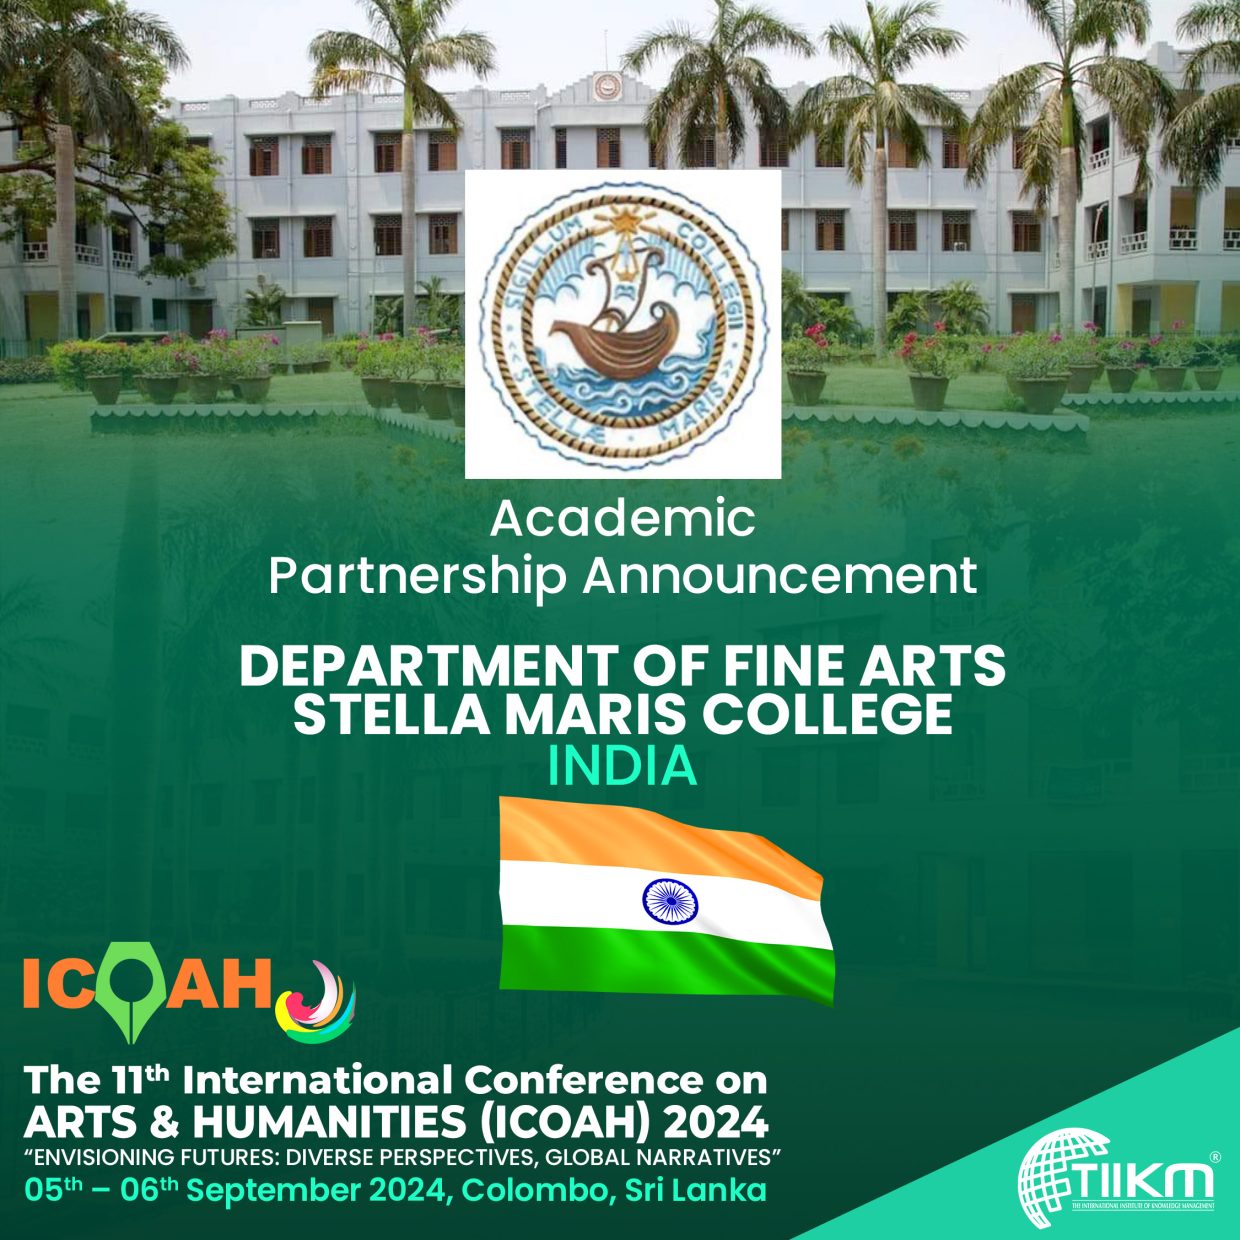 The 11th International Conference on
Arts & Humanities - ICOAH 2024